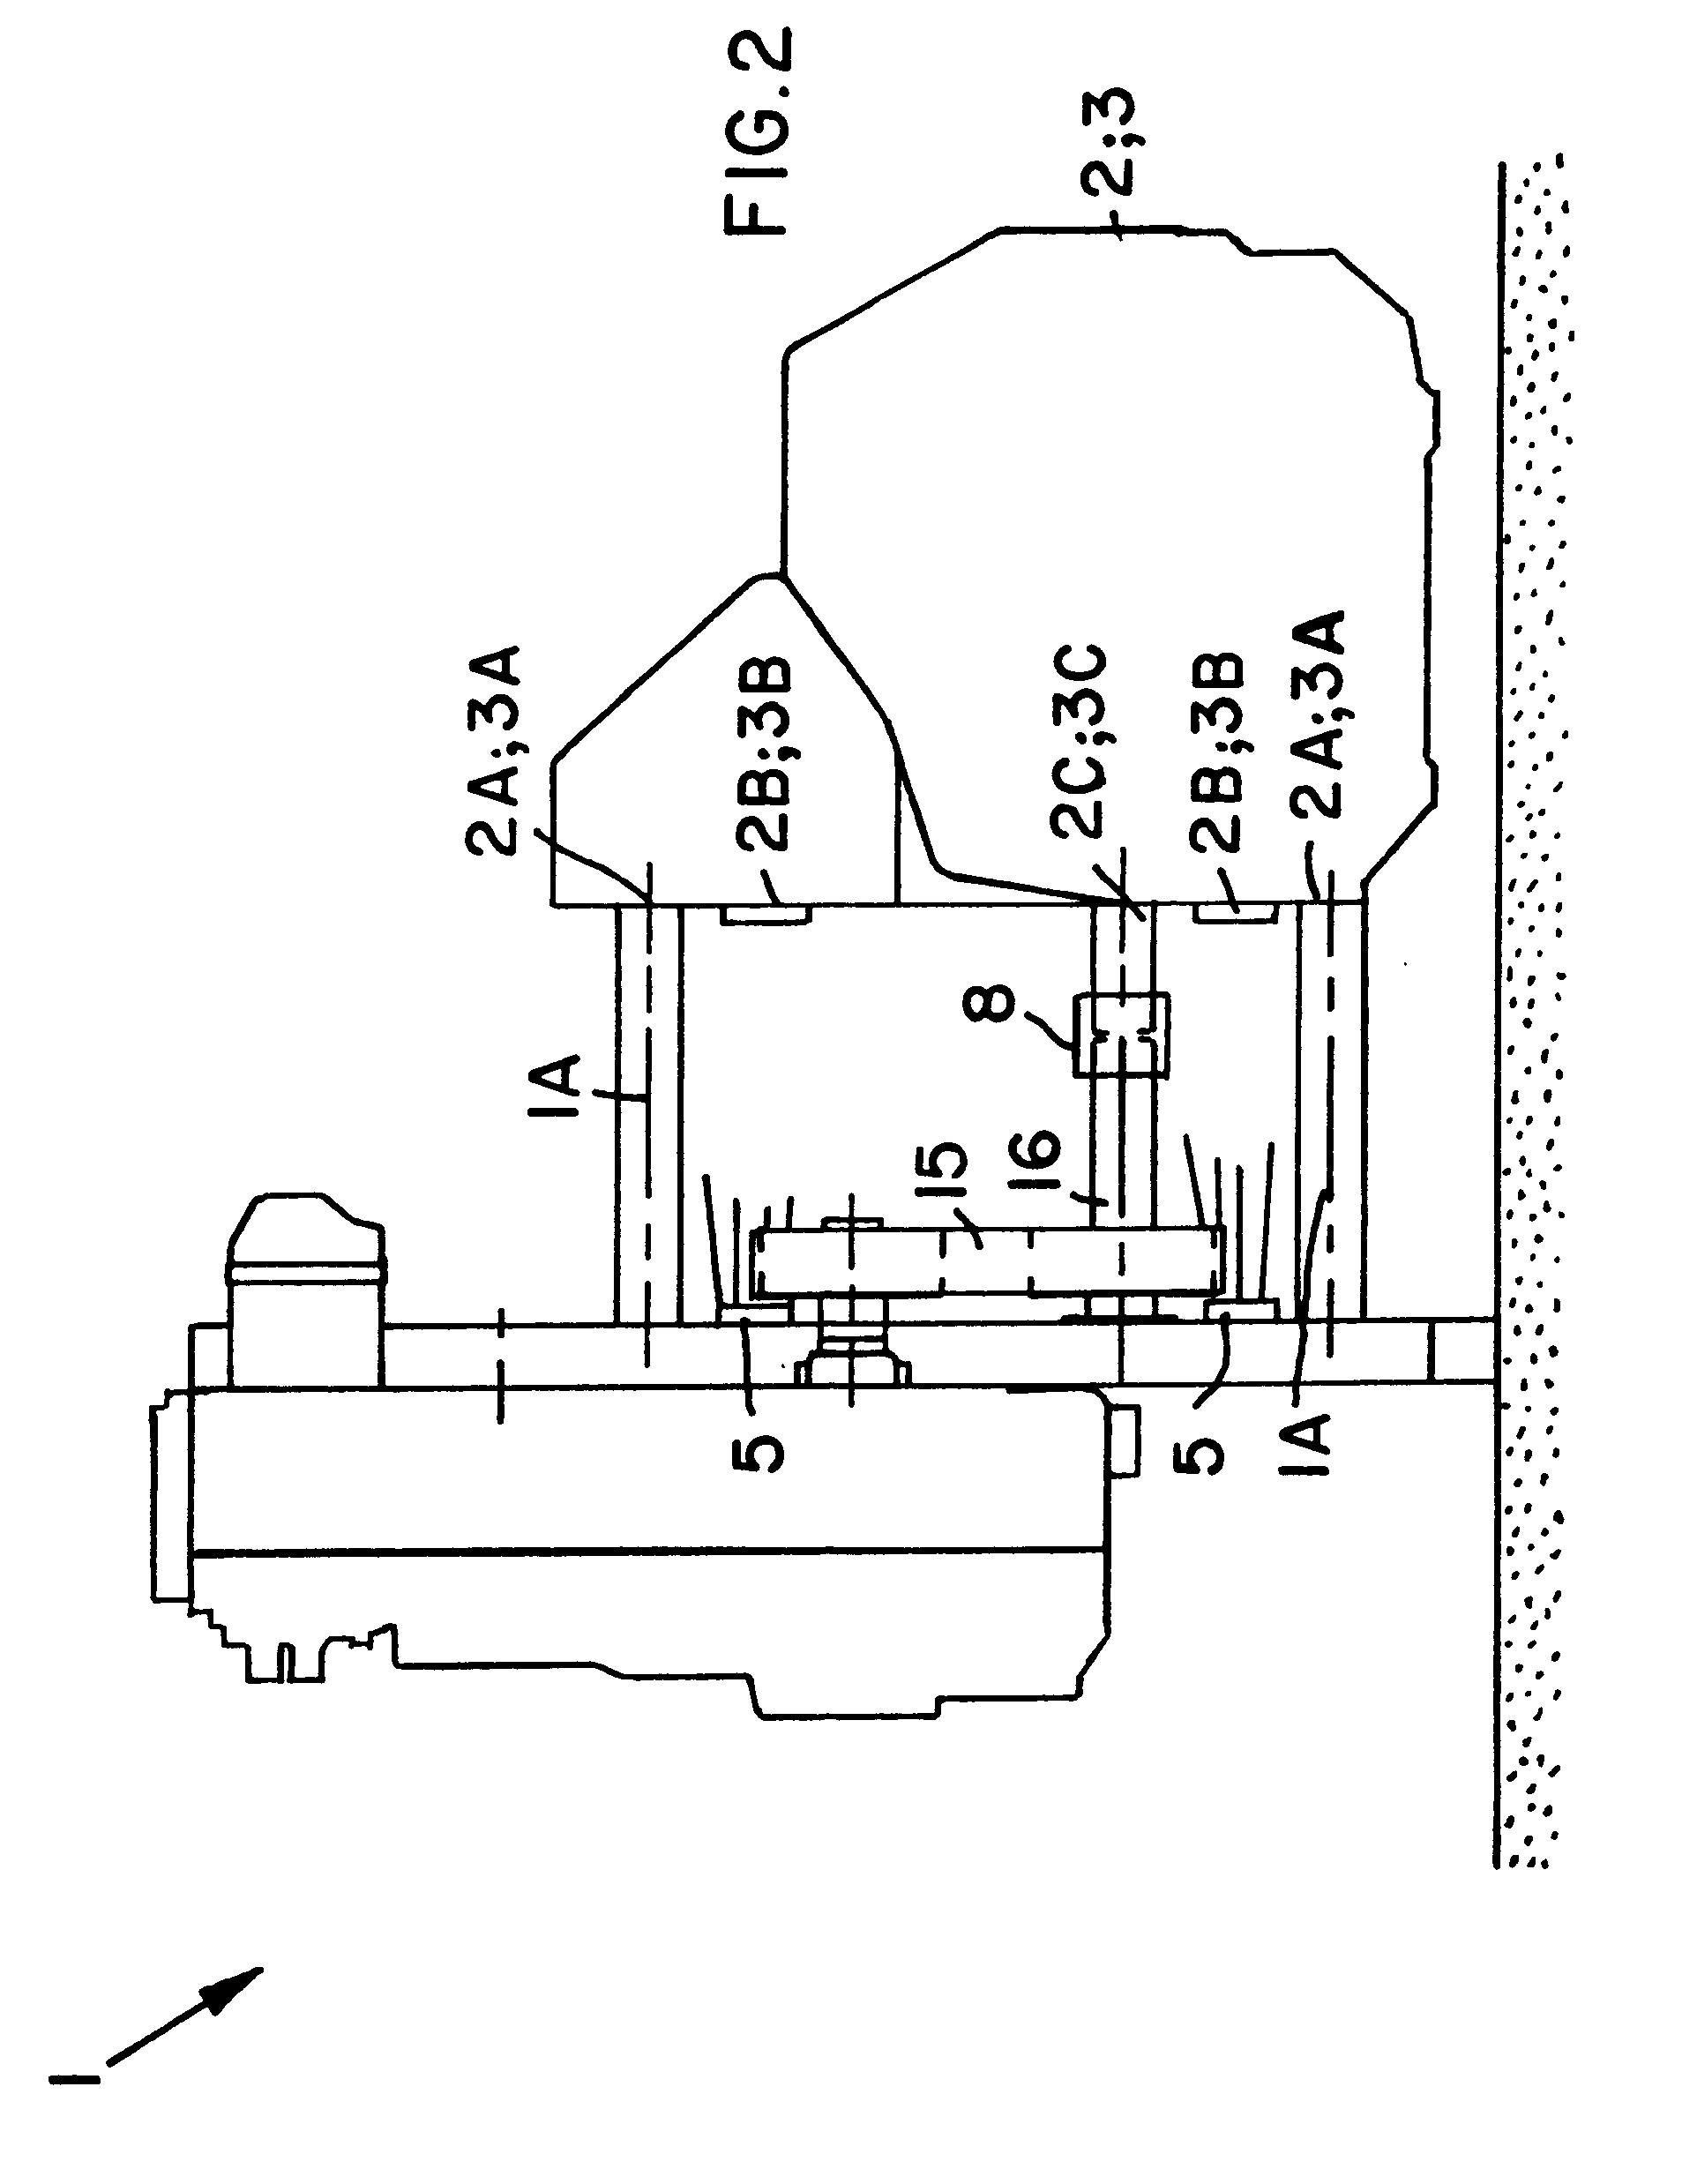 Method and apparatus for rapidly exchanging a shed drive in a heald loom